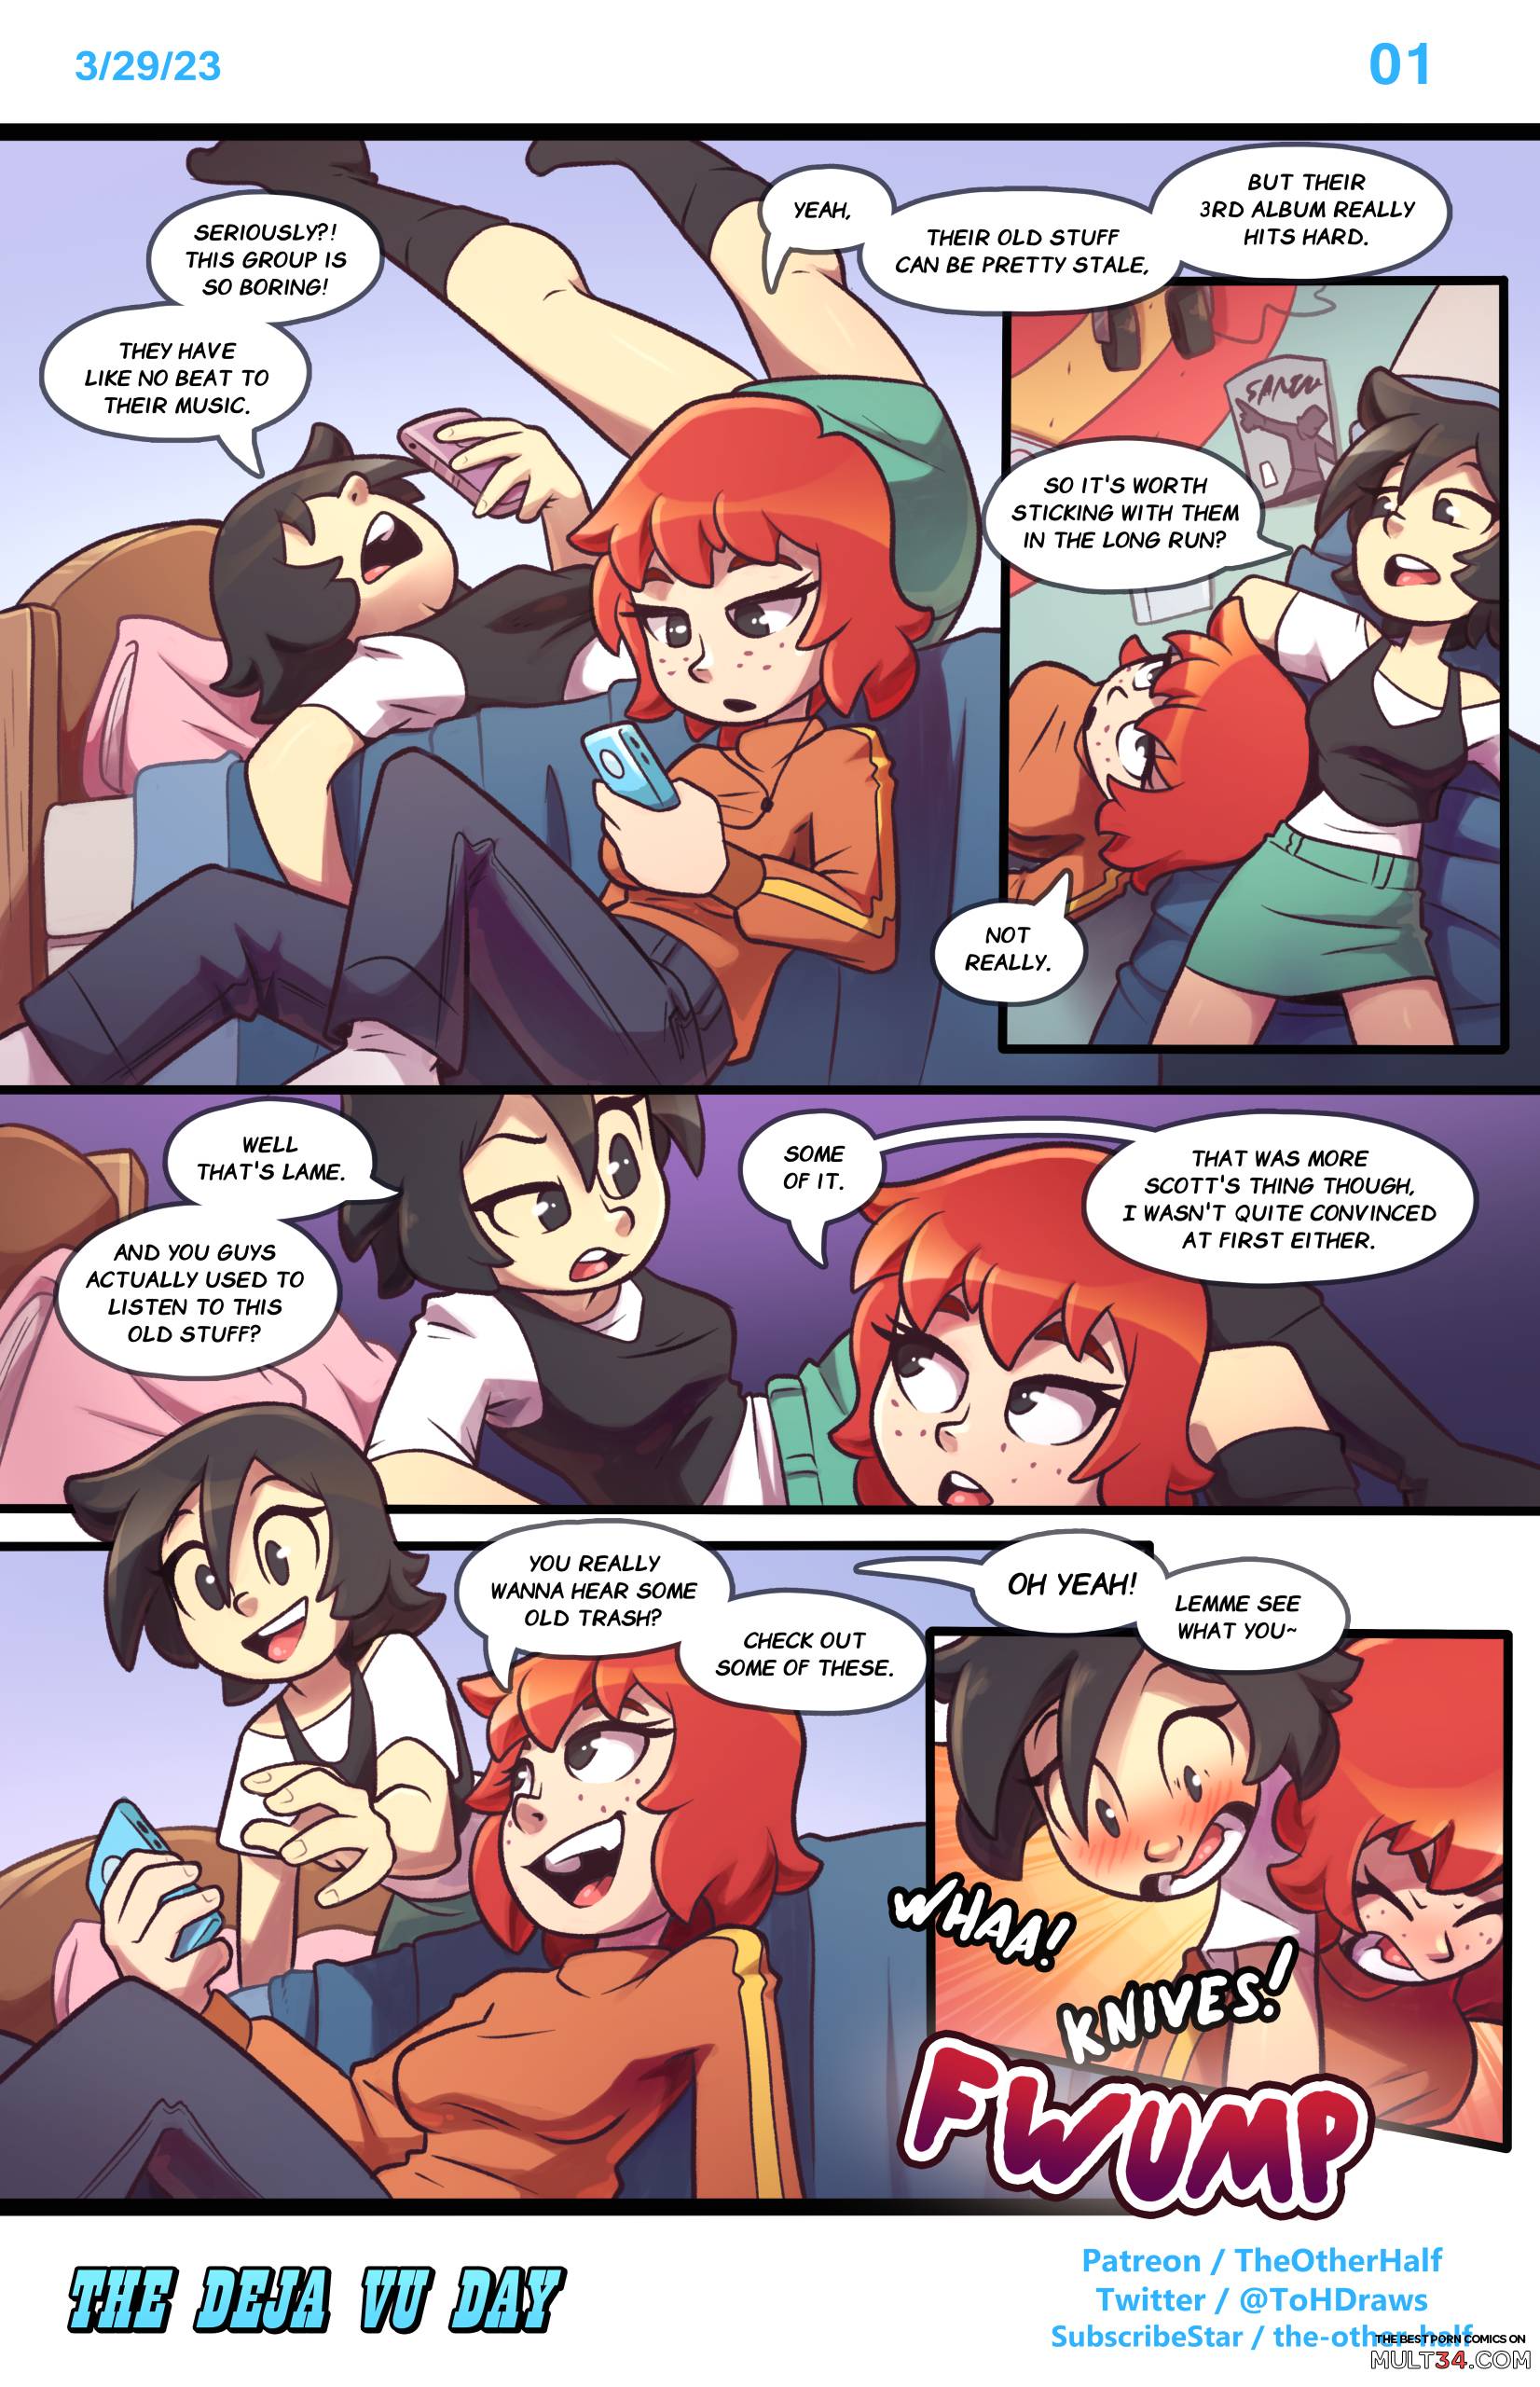 The Deja Vu Day page 1